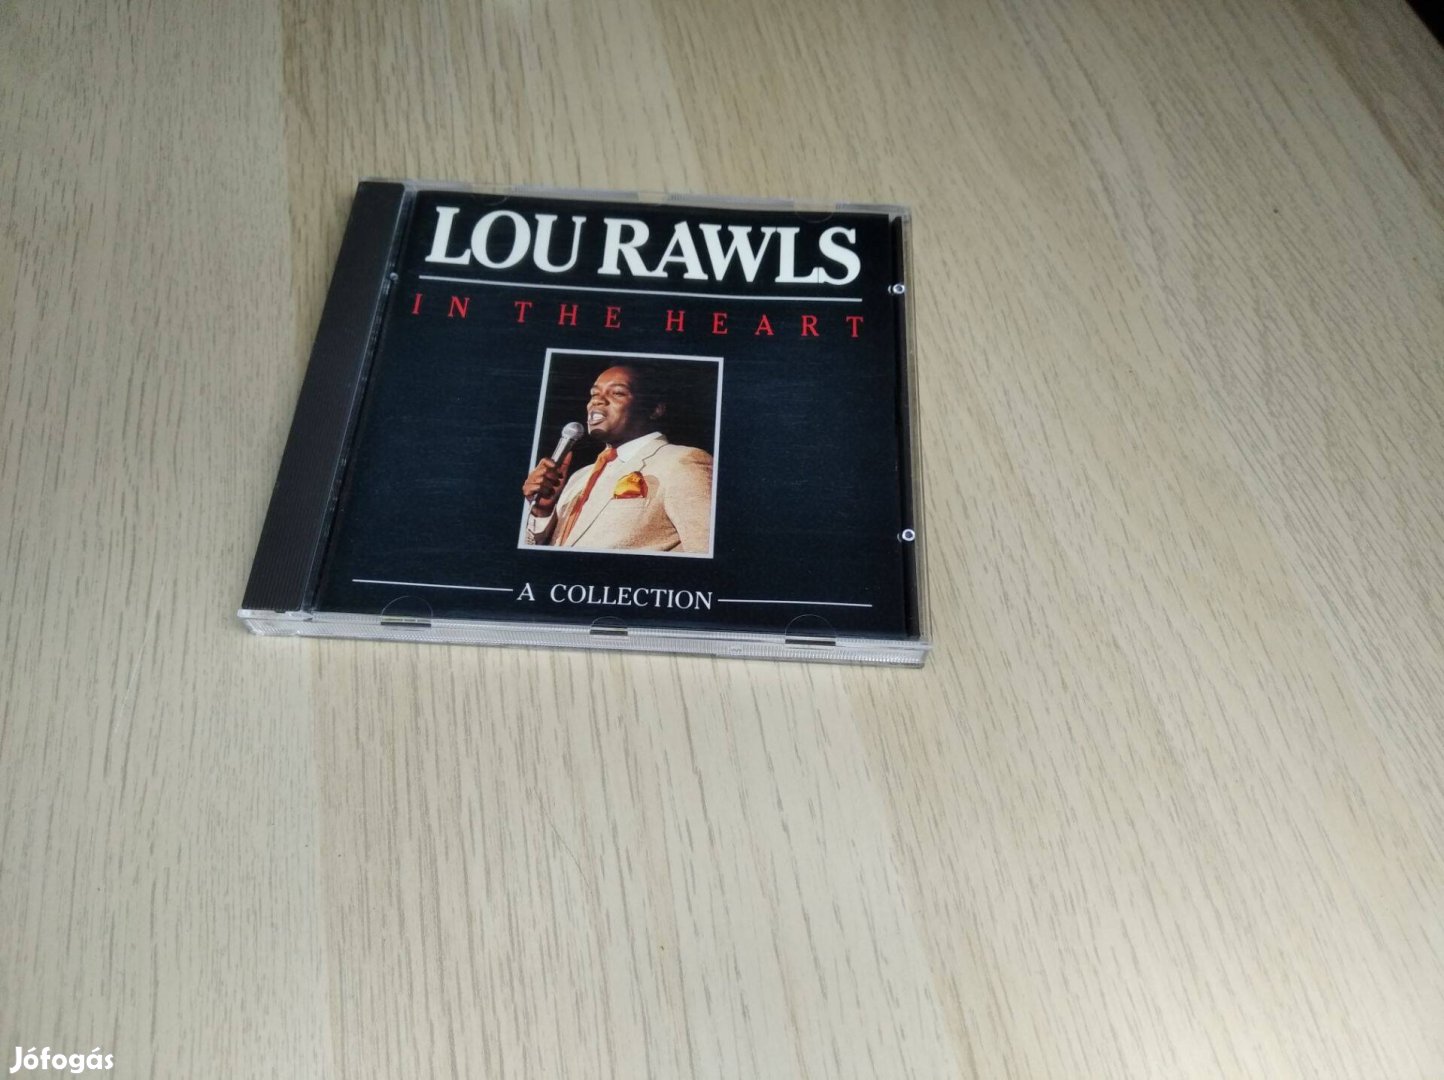 Lou Rawls - In The Heart - A Collection / CD